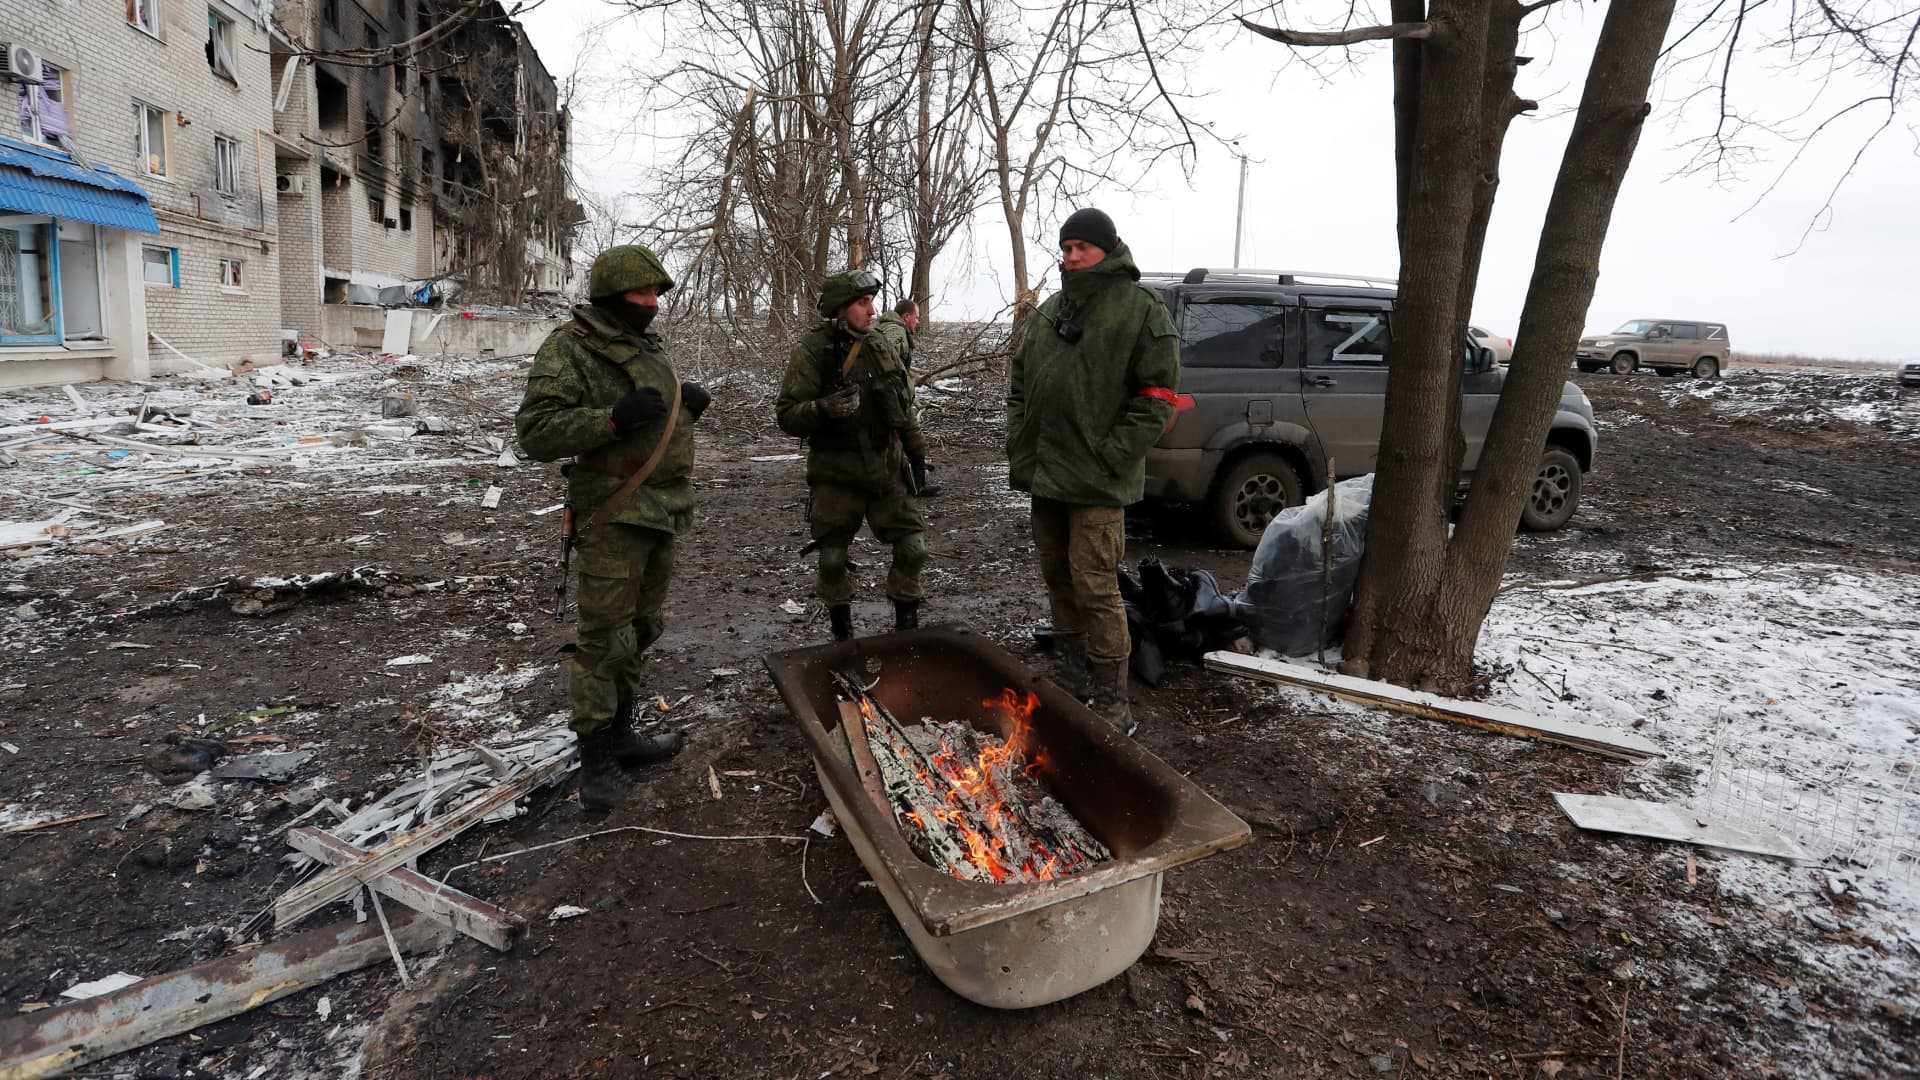 Service members of pro-Russian troops in uniforms without insignia gather around a fire outside a residential building which was damaged during Ukraine-Russia conflict in the separatist-controlled town of Volnovakha in the Donetsk region, Ukraine March 11, 2022. 